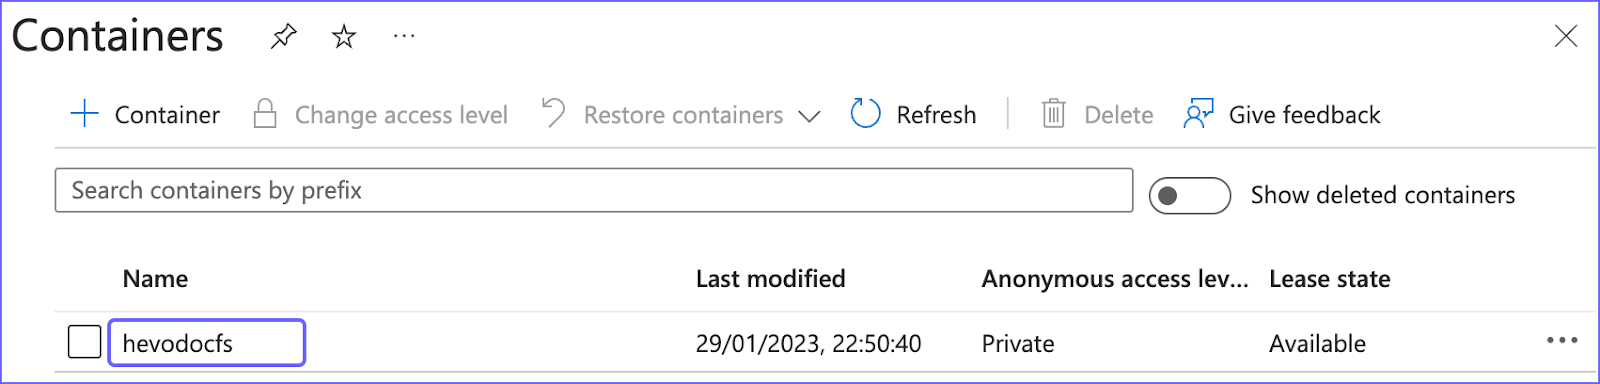 Azure Blob Storage to Snowflake: Configuring values in the Containers tab.